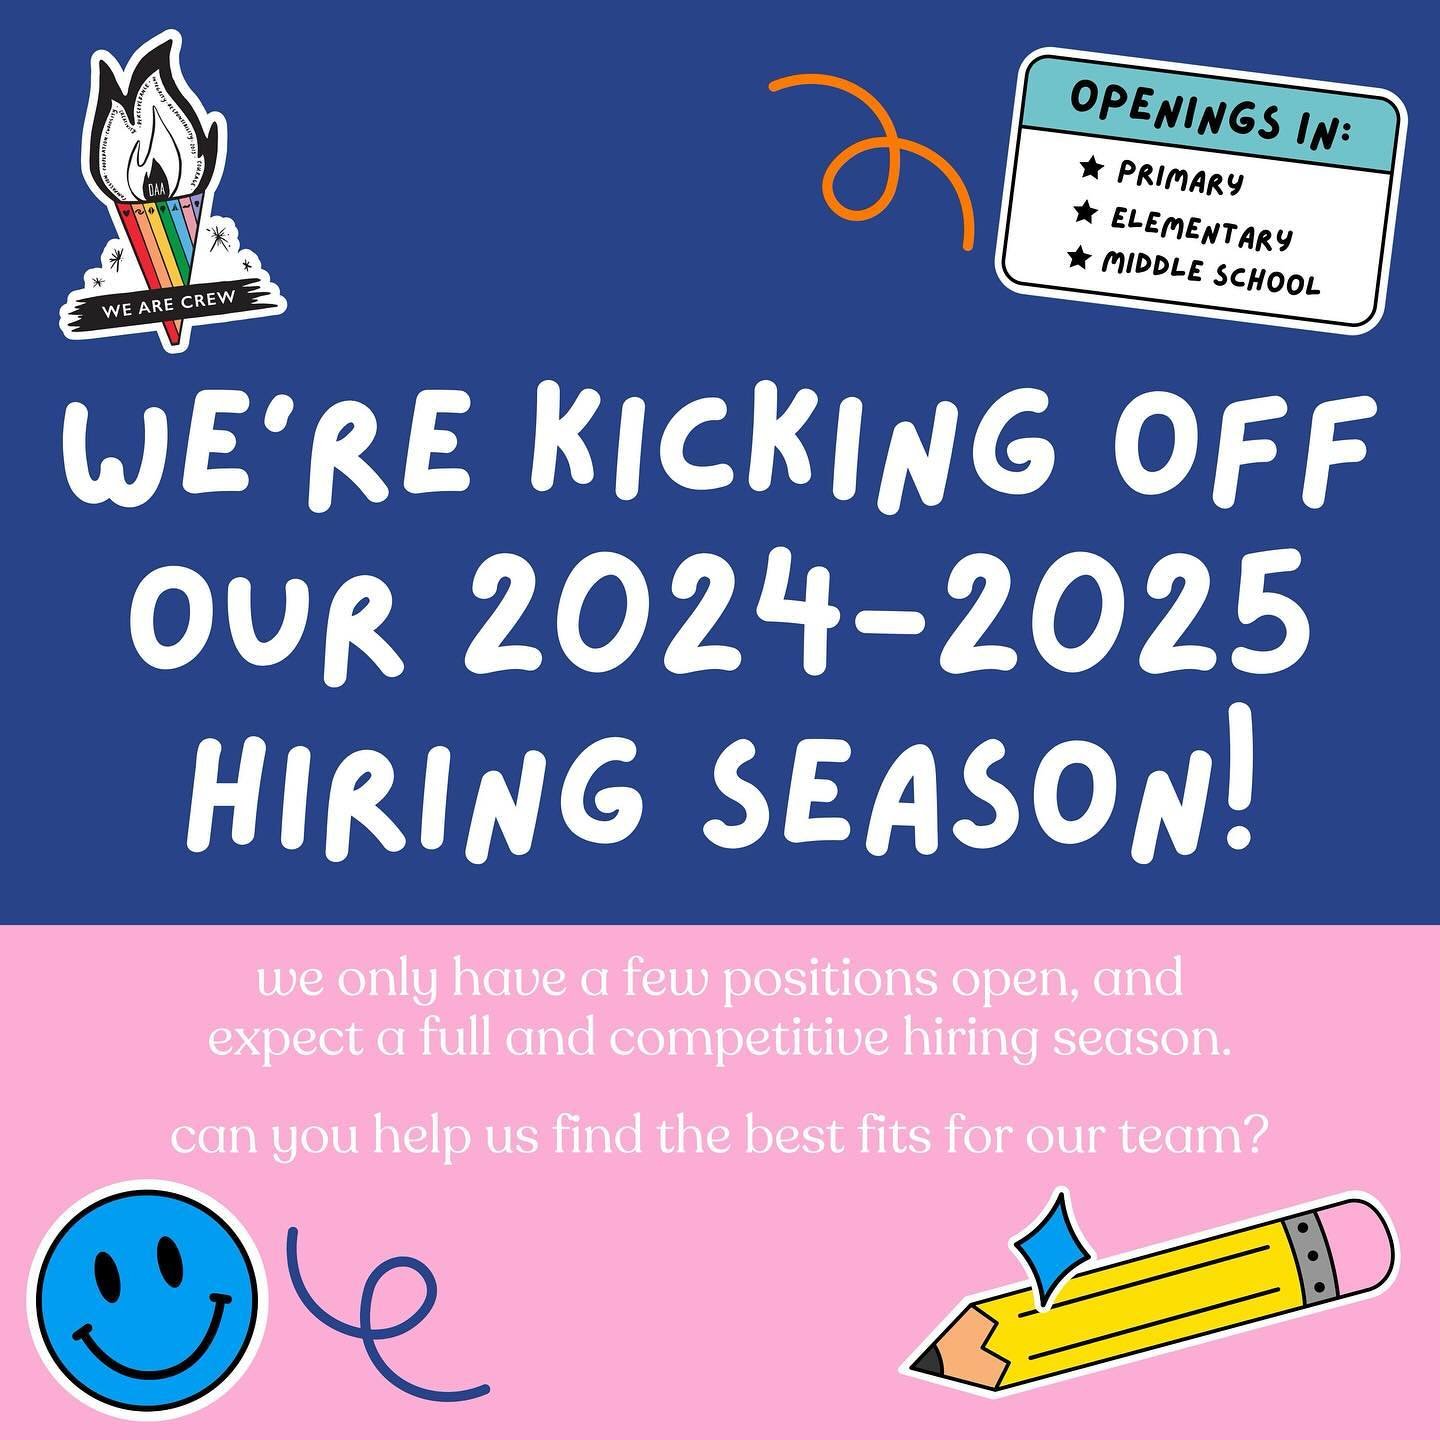 Our 2024-2025 hiring season is officially OPEN! We are so excited to find the perfect teammates to join our adult crew! Scroll ➡️ to browse a handful of our great positions open! 

We already have heard from some amazing candidates, and expect these 